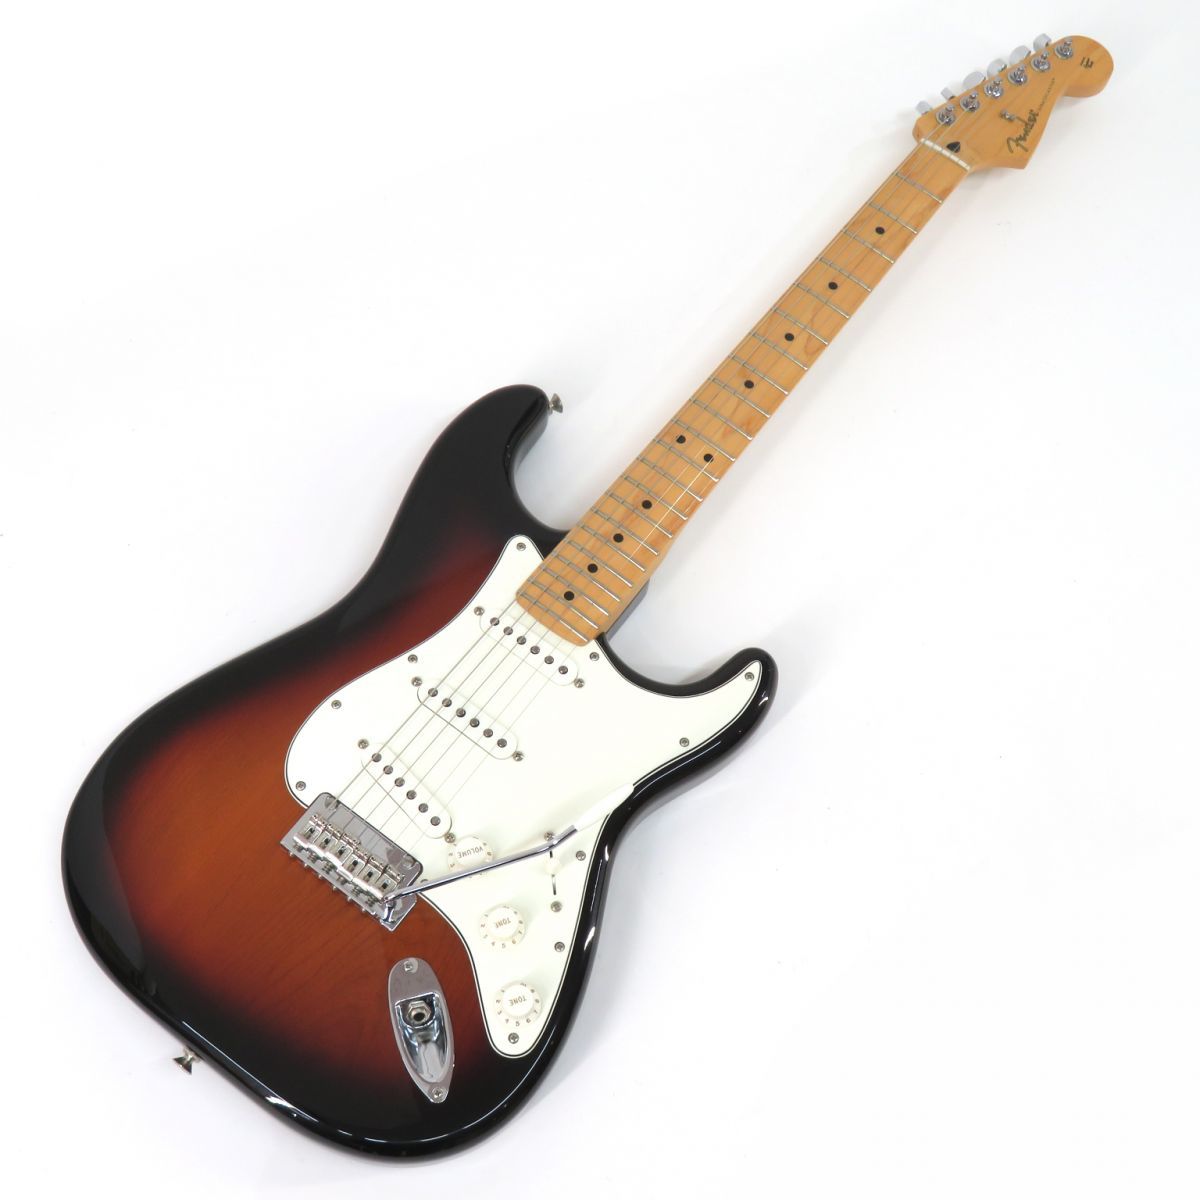 092s☆Fender Mexico フェンダーメキシコ Player Stratocaster 2TS